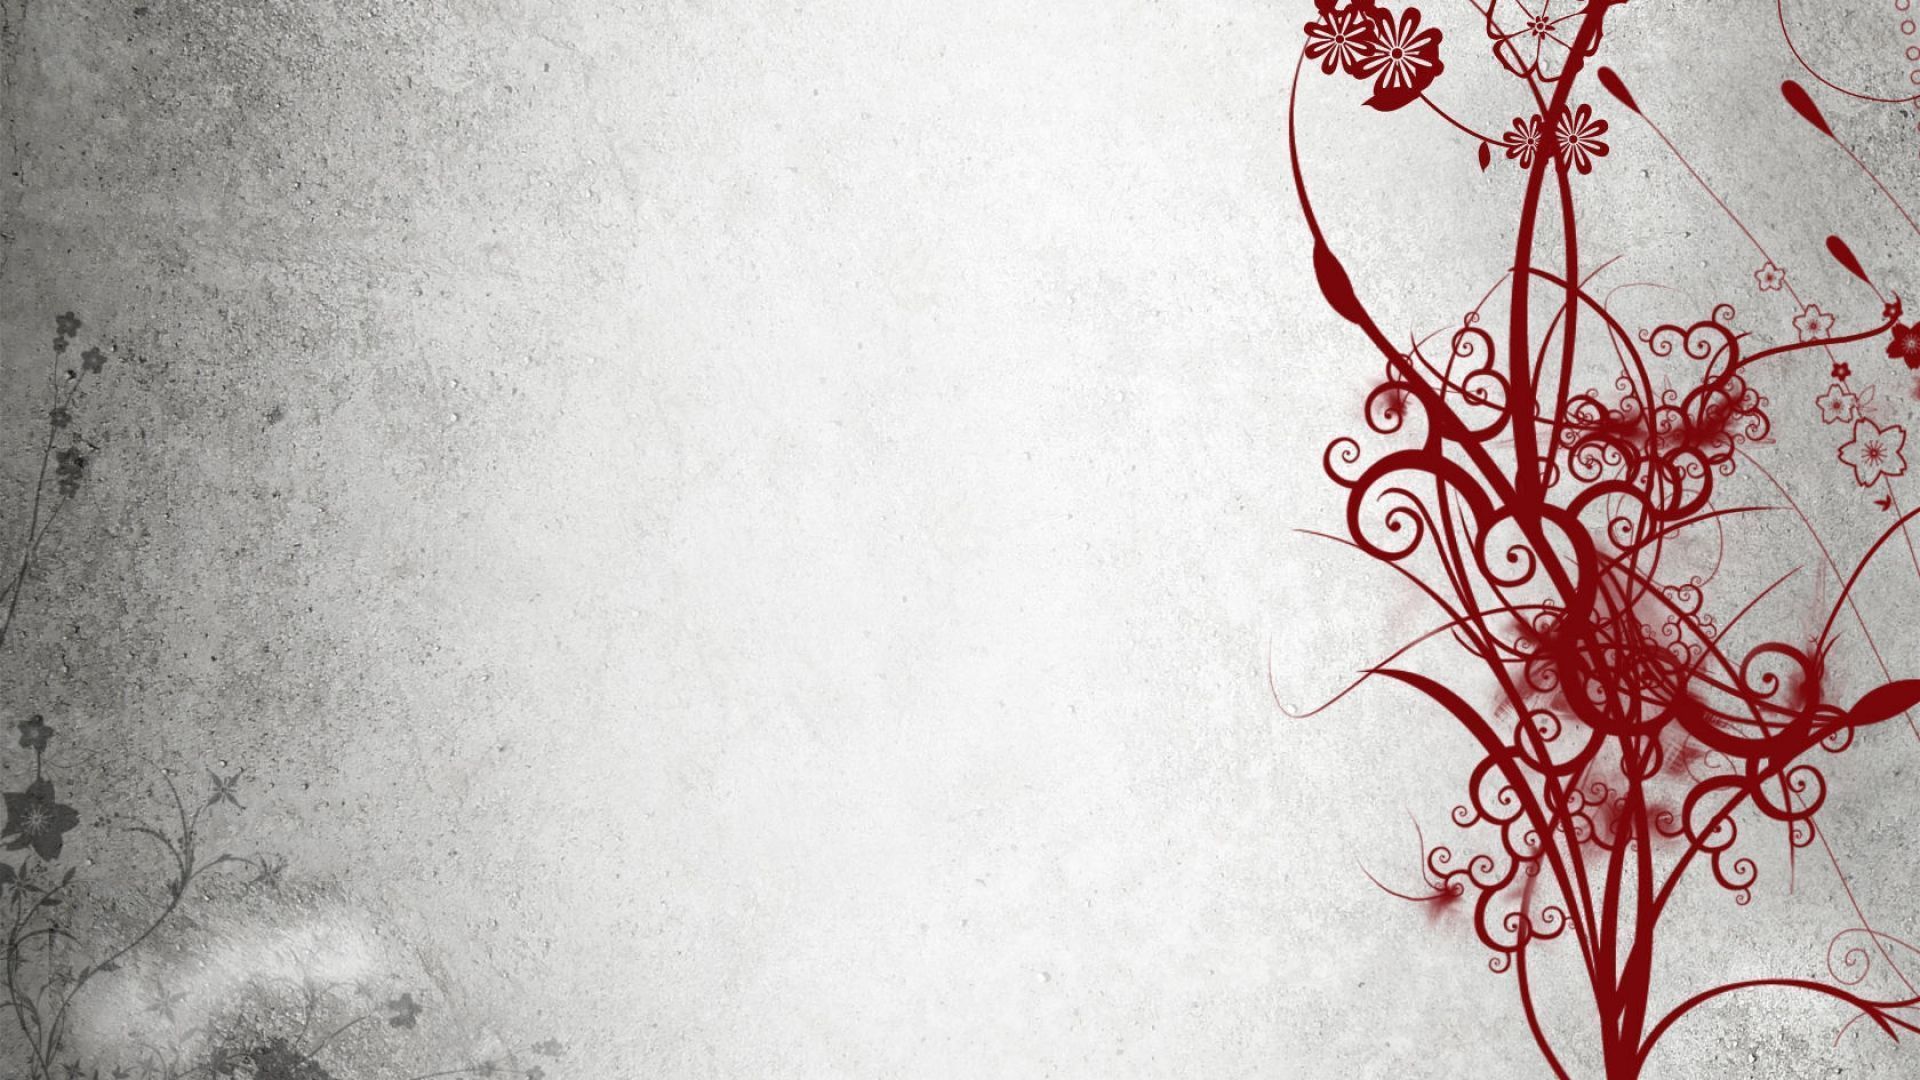 Download Wallpaper 1920x1080 Abstract, Black, White, Red Full HD ...